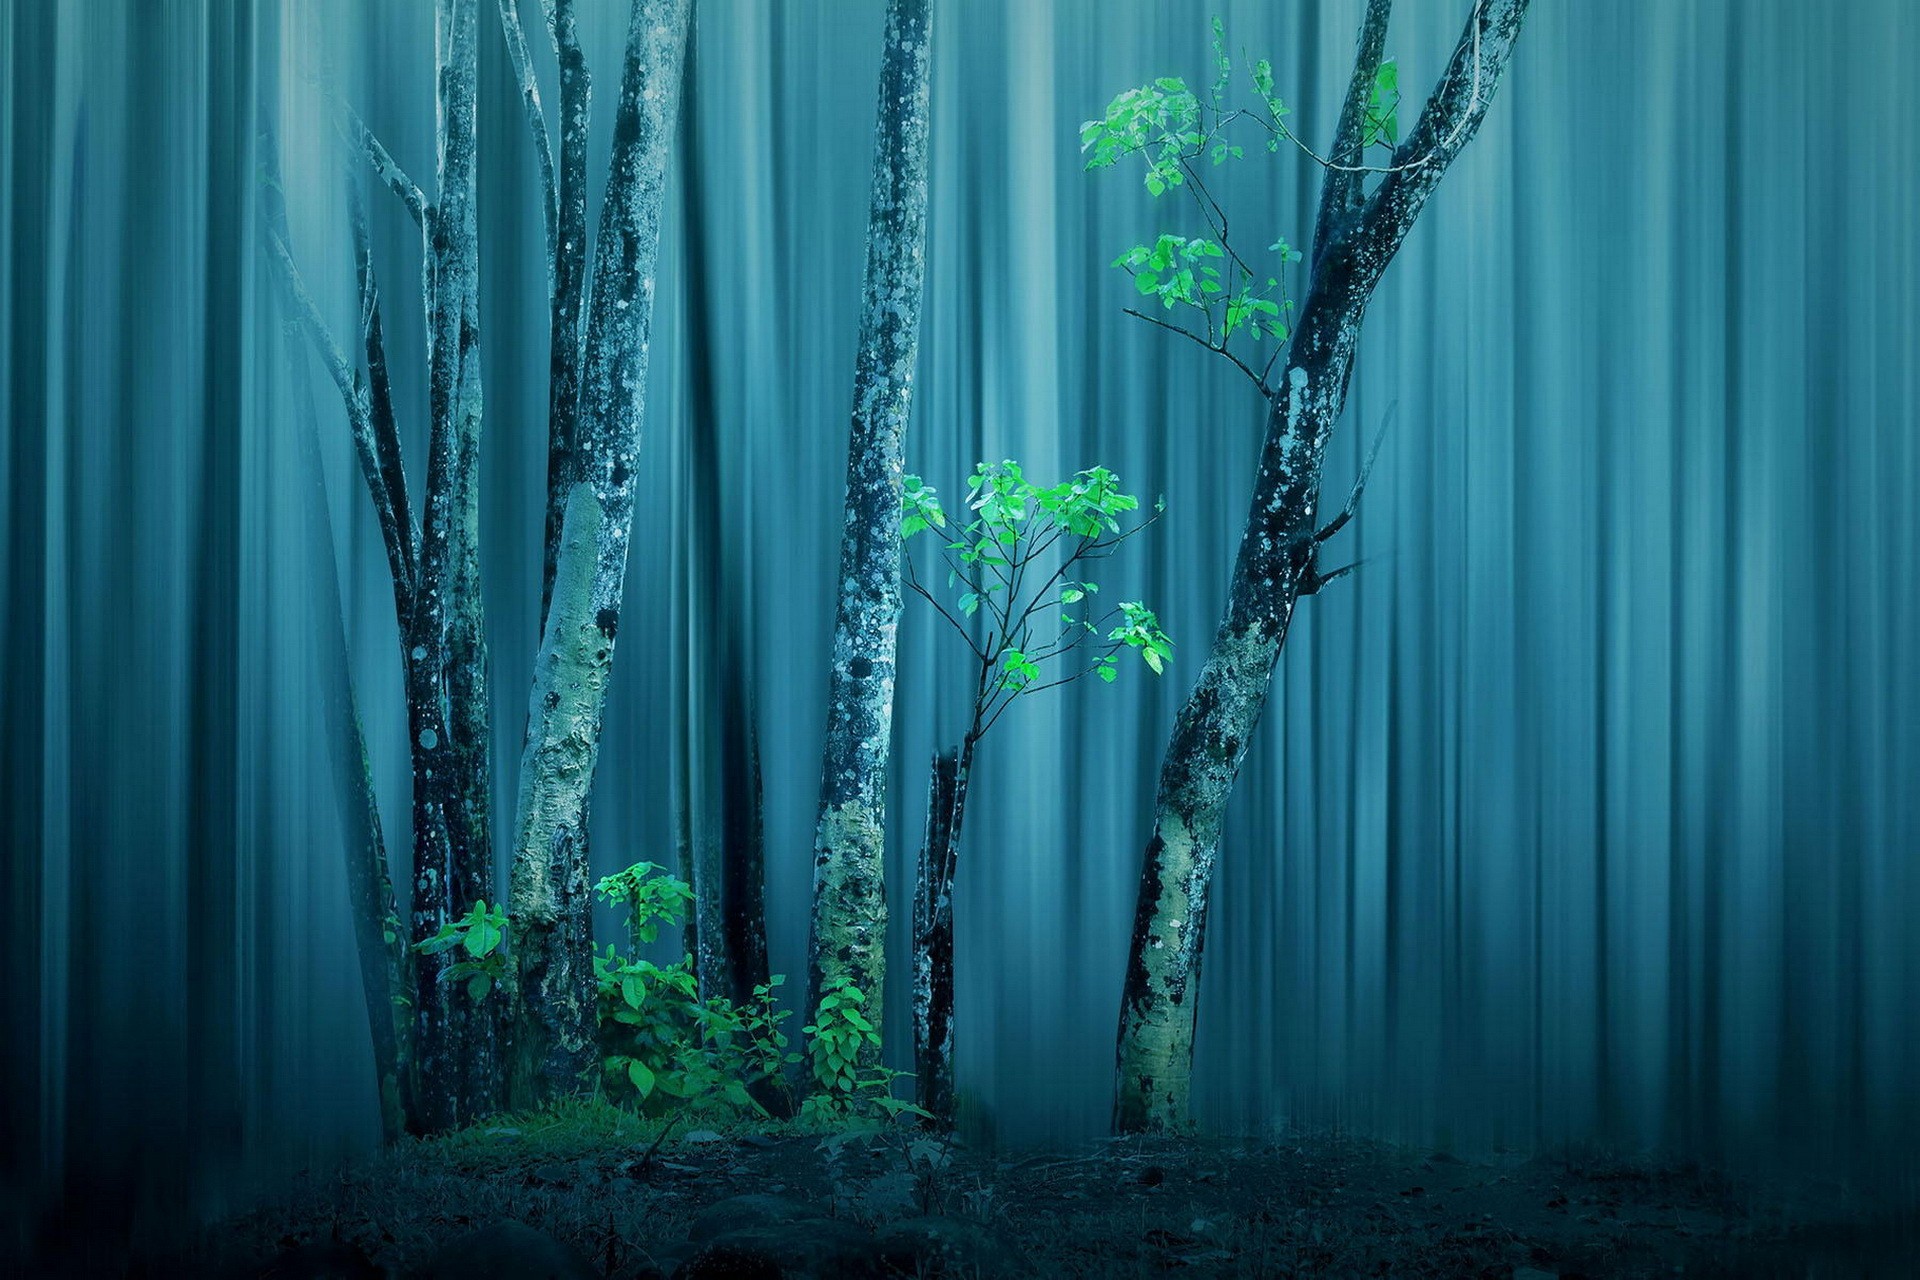 General 1920x1280 trees mist forest nature photo manipulation blue turquoise blurred plants